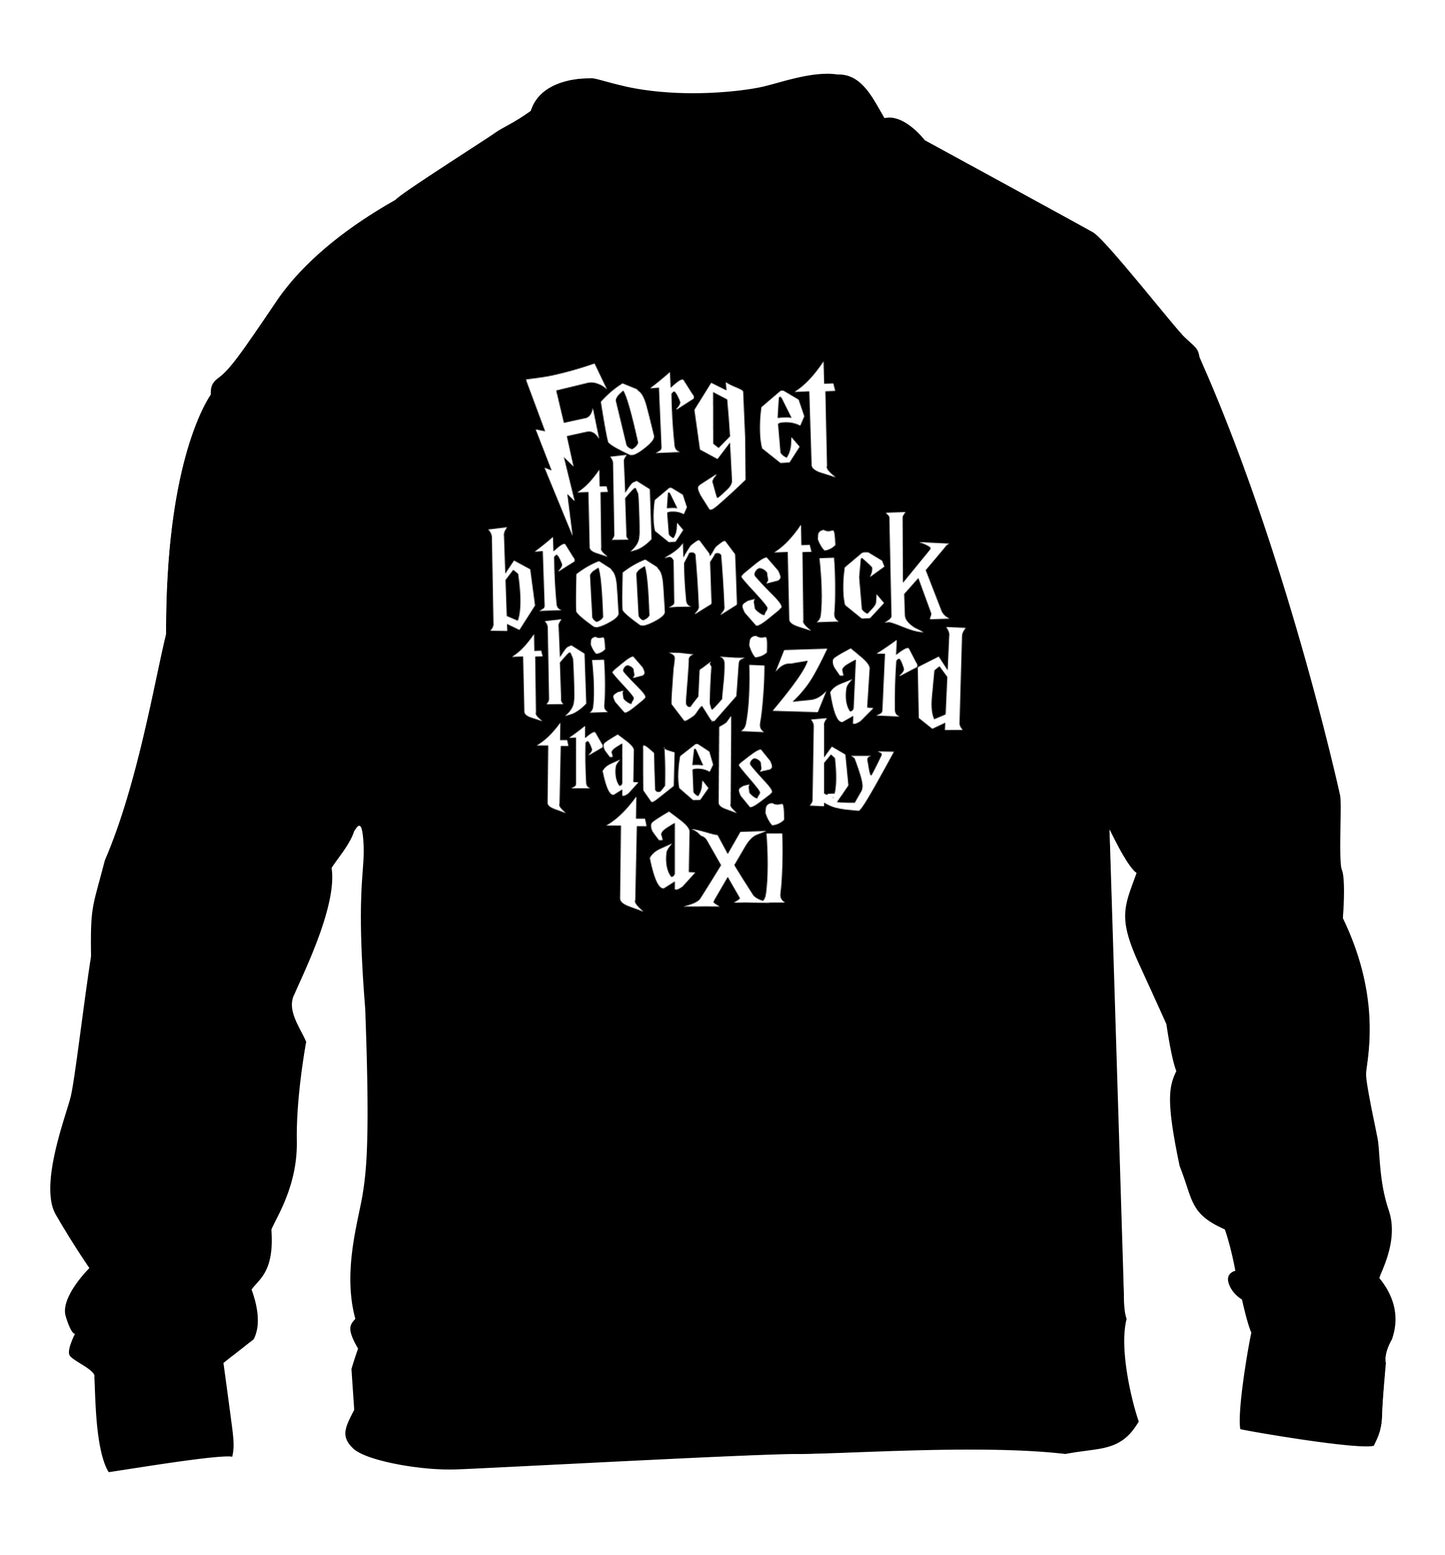 Forget the broomstick this wizard travels by taxi children's black sweater 12-14 Years